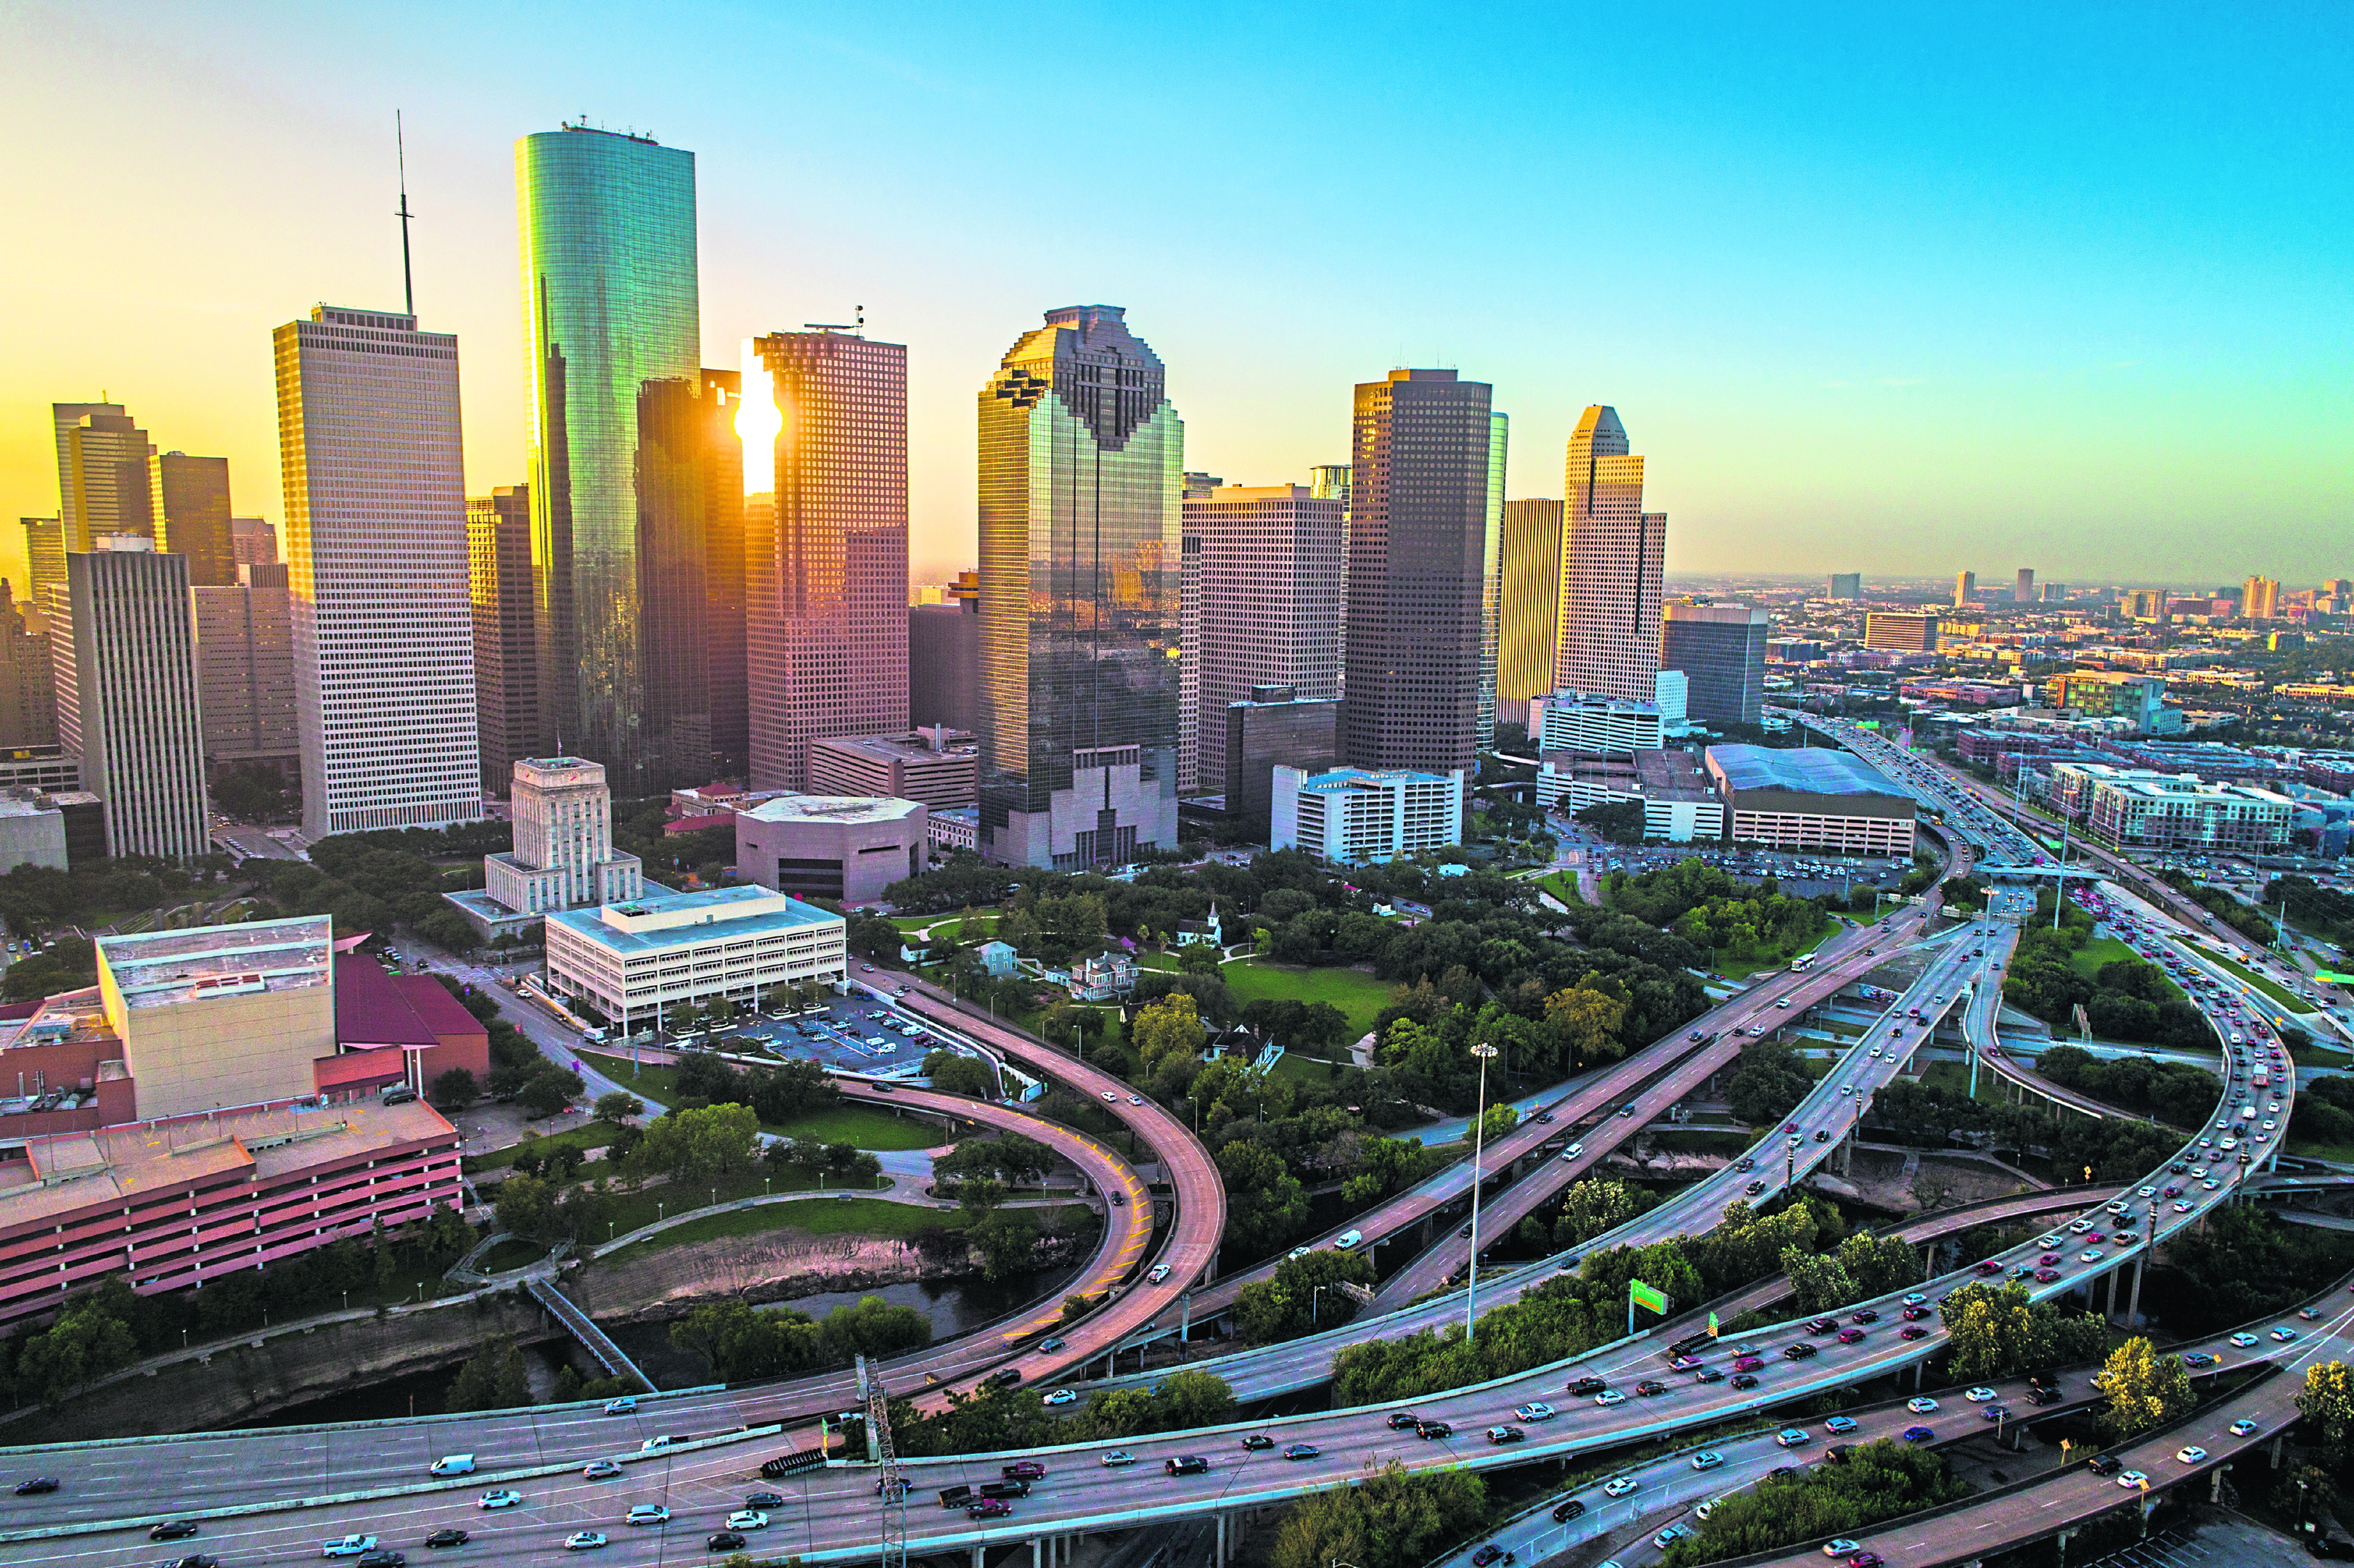 Houston: the landscape is constantly changing